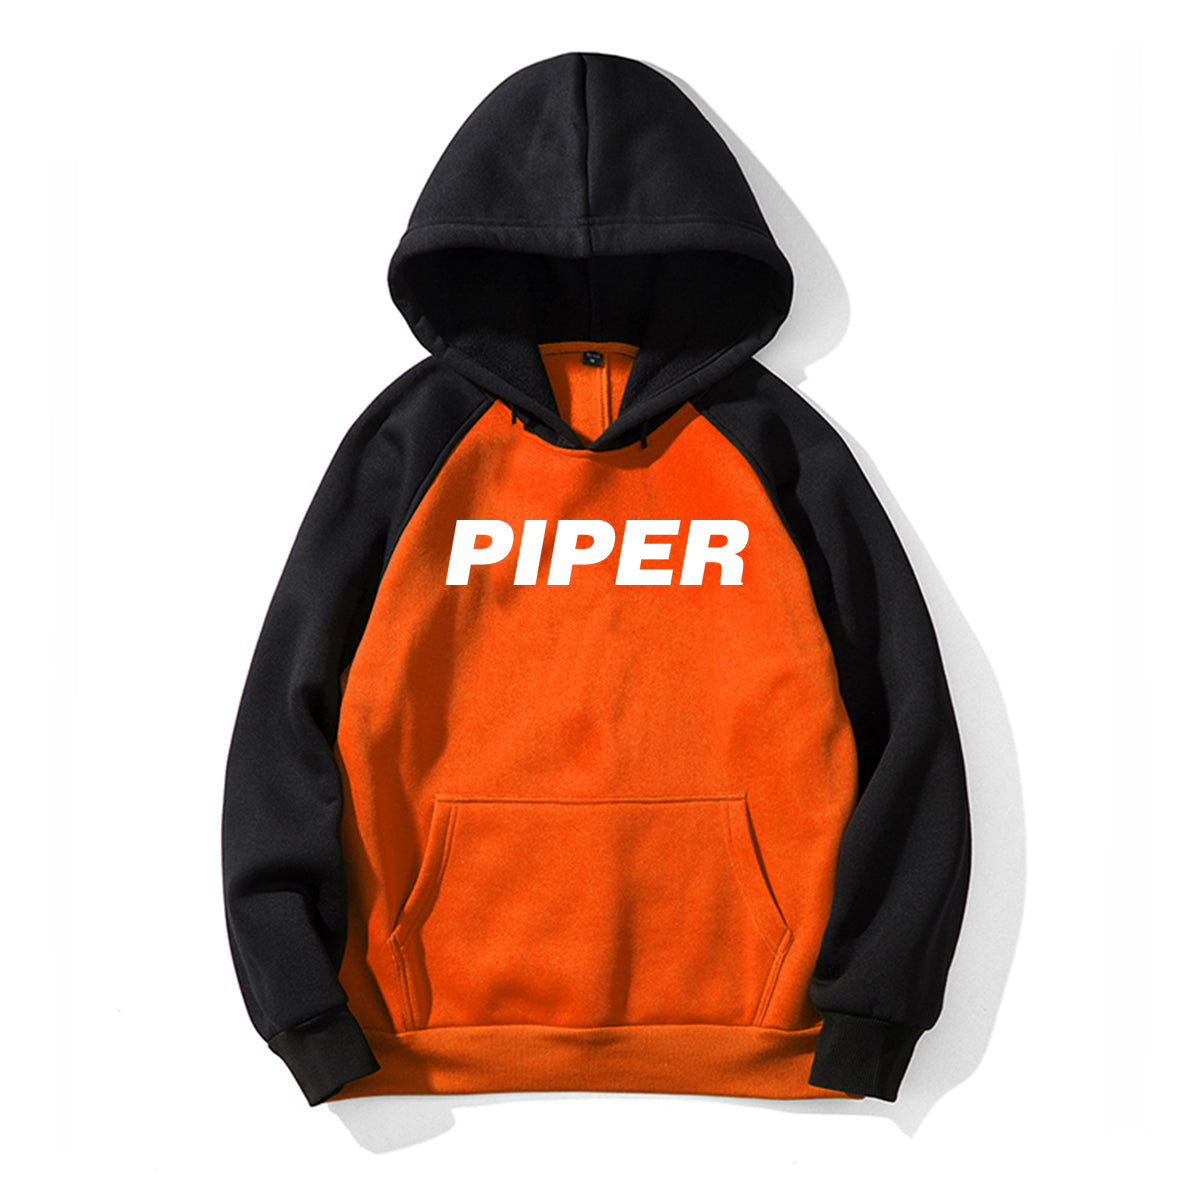 Piper & Text Designed Colourful Hoodies